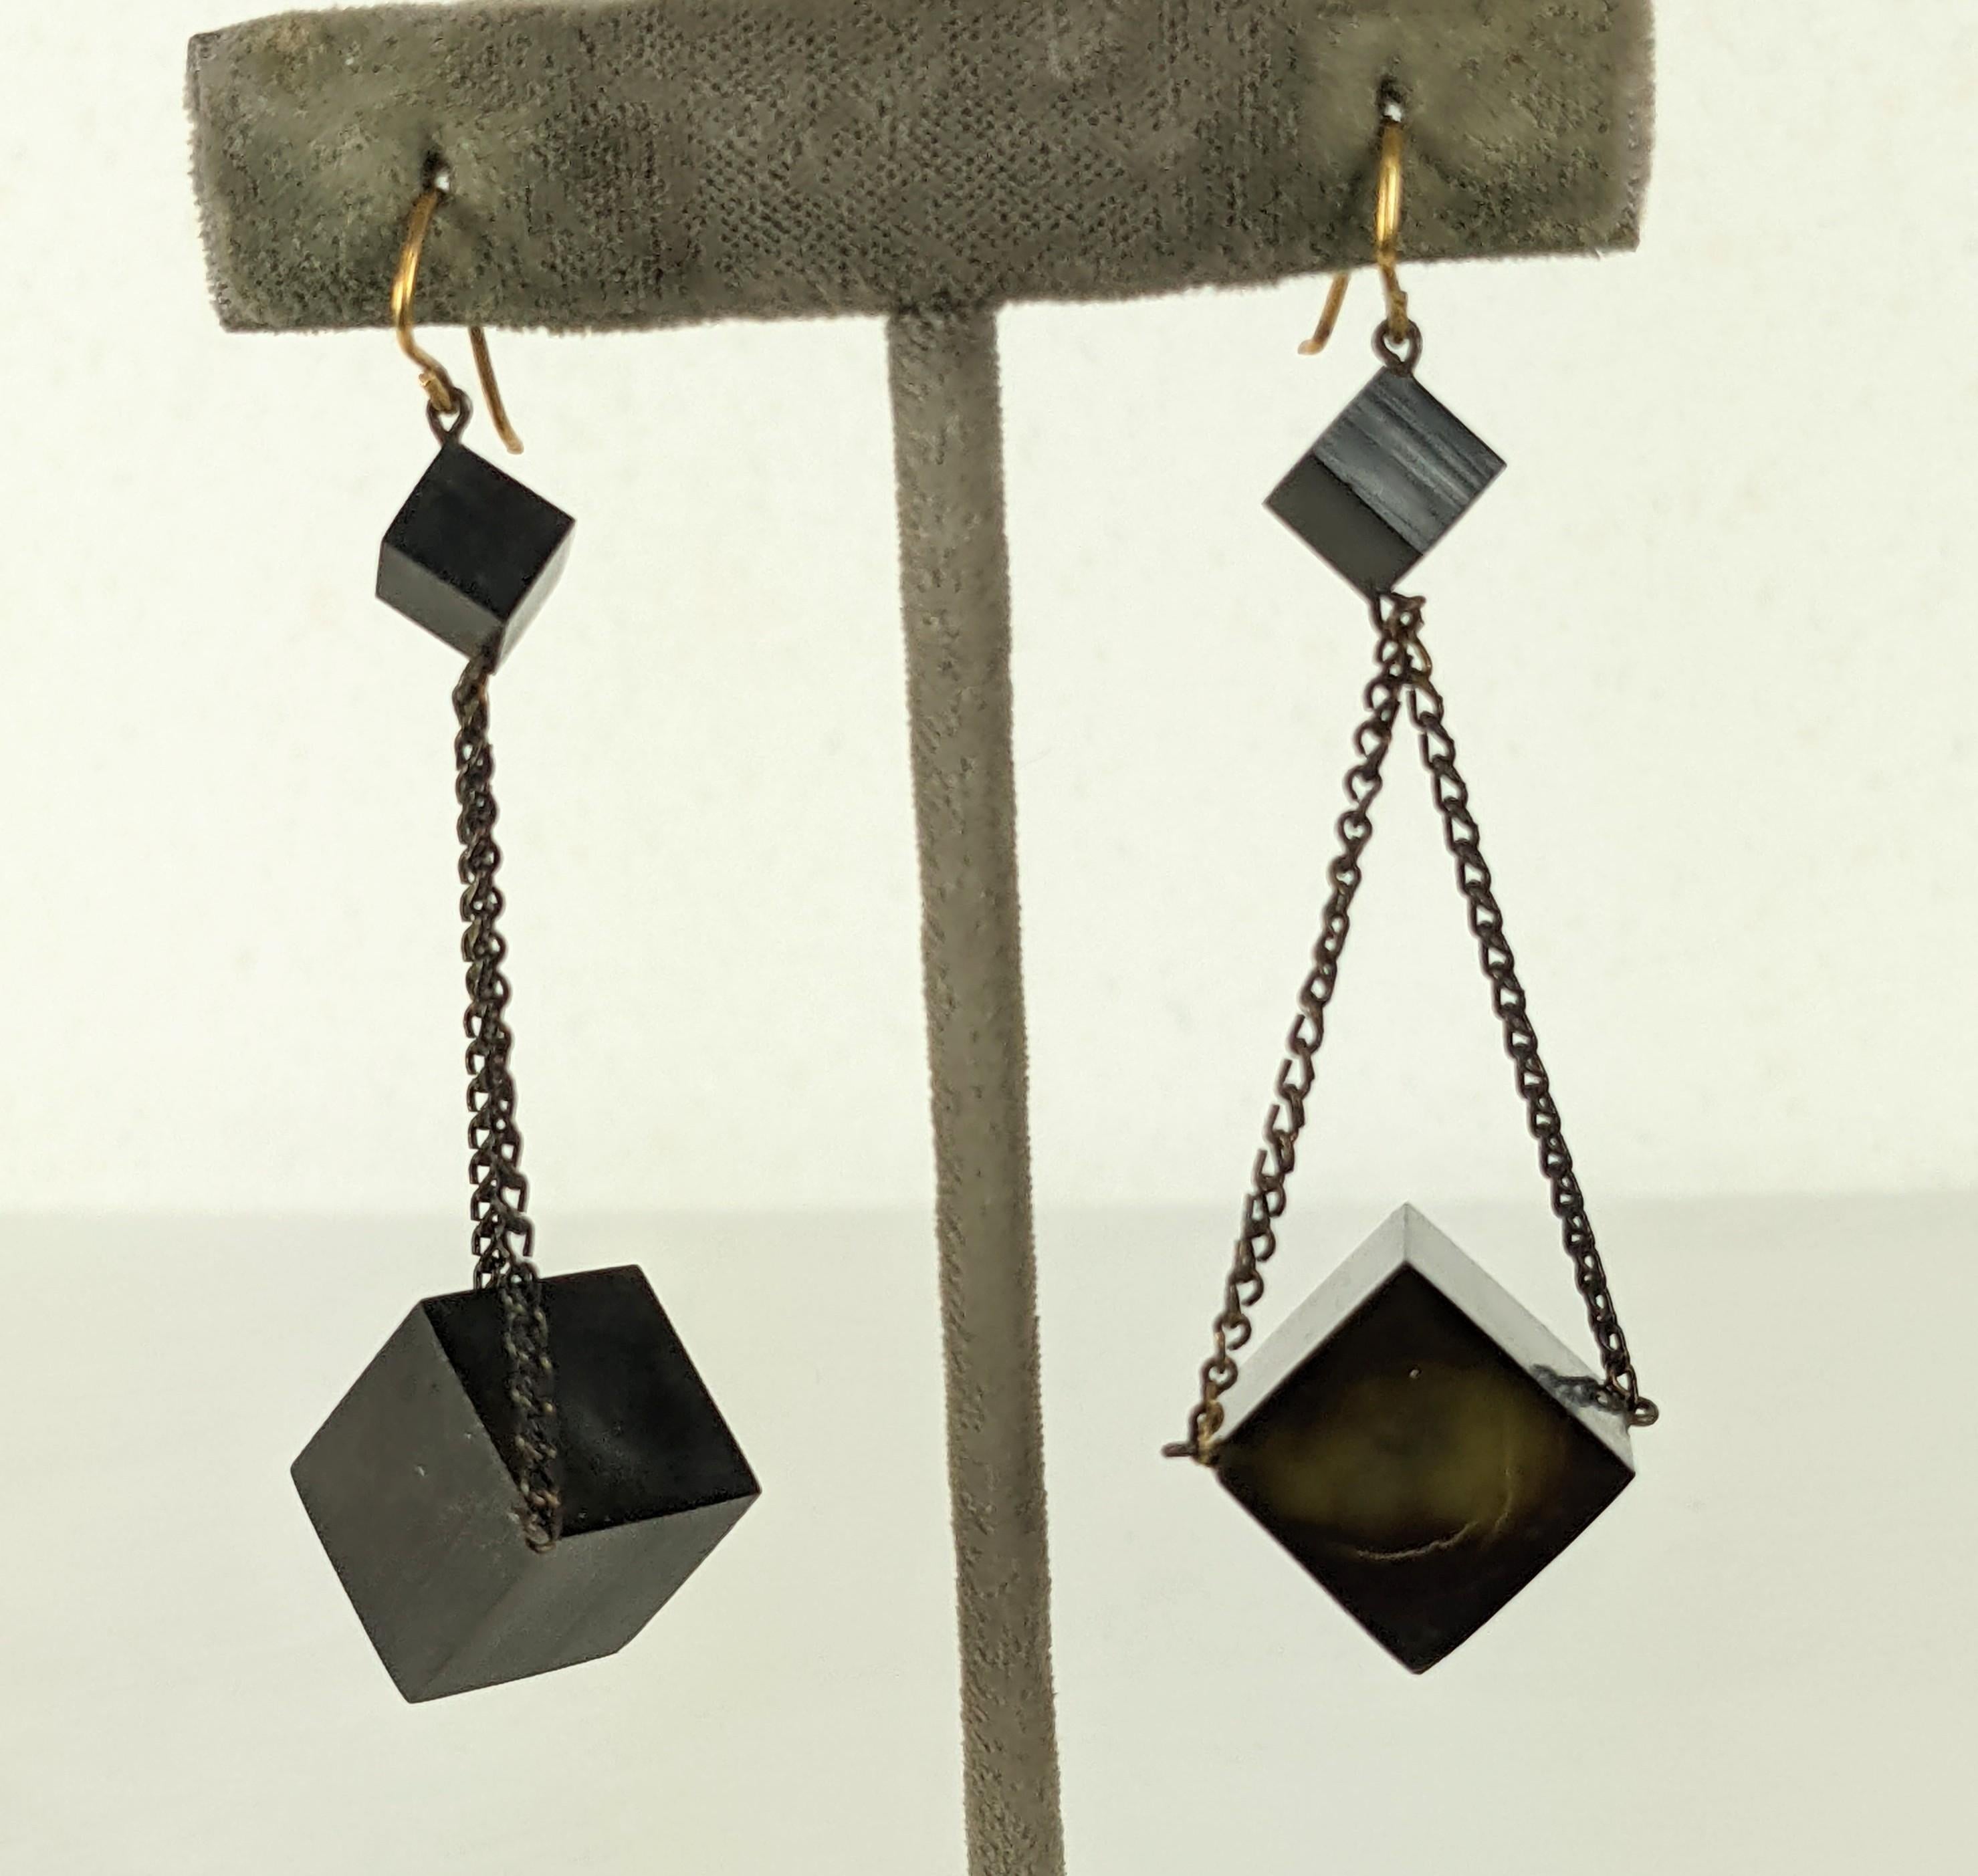 Unusual Gutta Percha Victorian Geometric Earrings from the 19th Century. Extremely Modern in design but created in the late 1800's. 2 cubes of gutta percha of different sizes are simply suspended from a blackened chain. The gold filled ear wires are